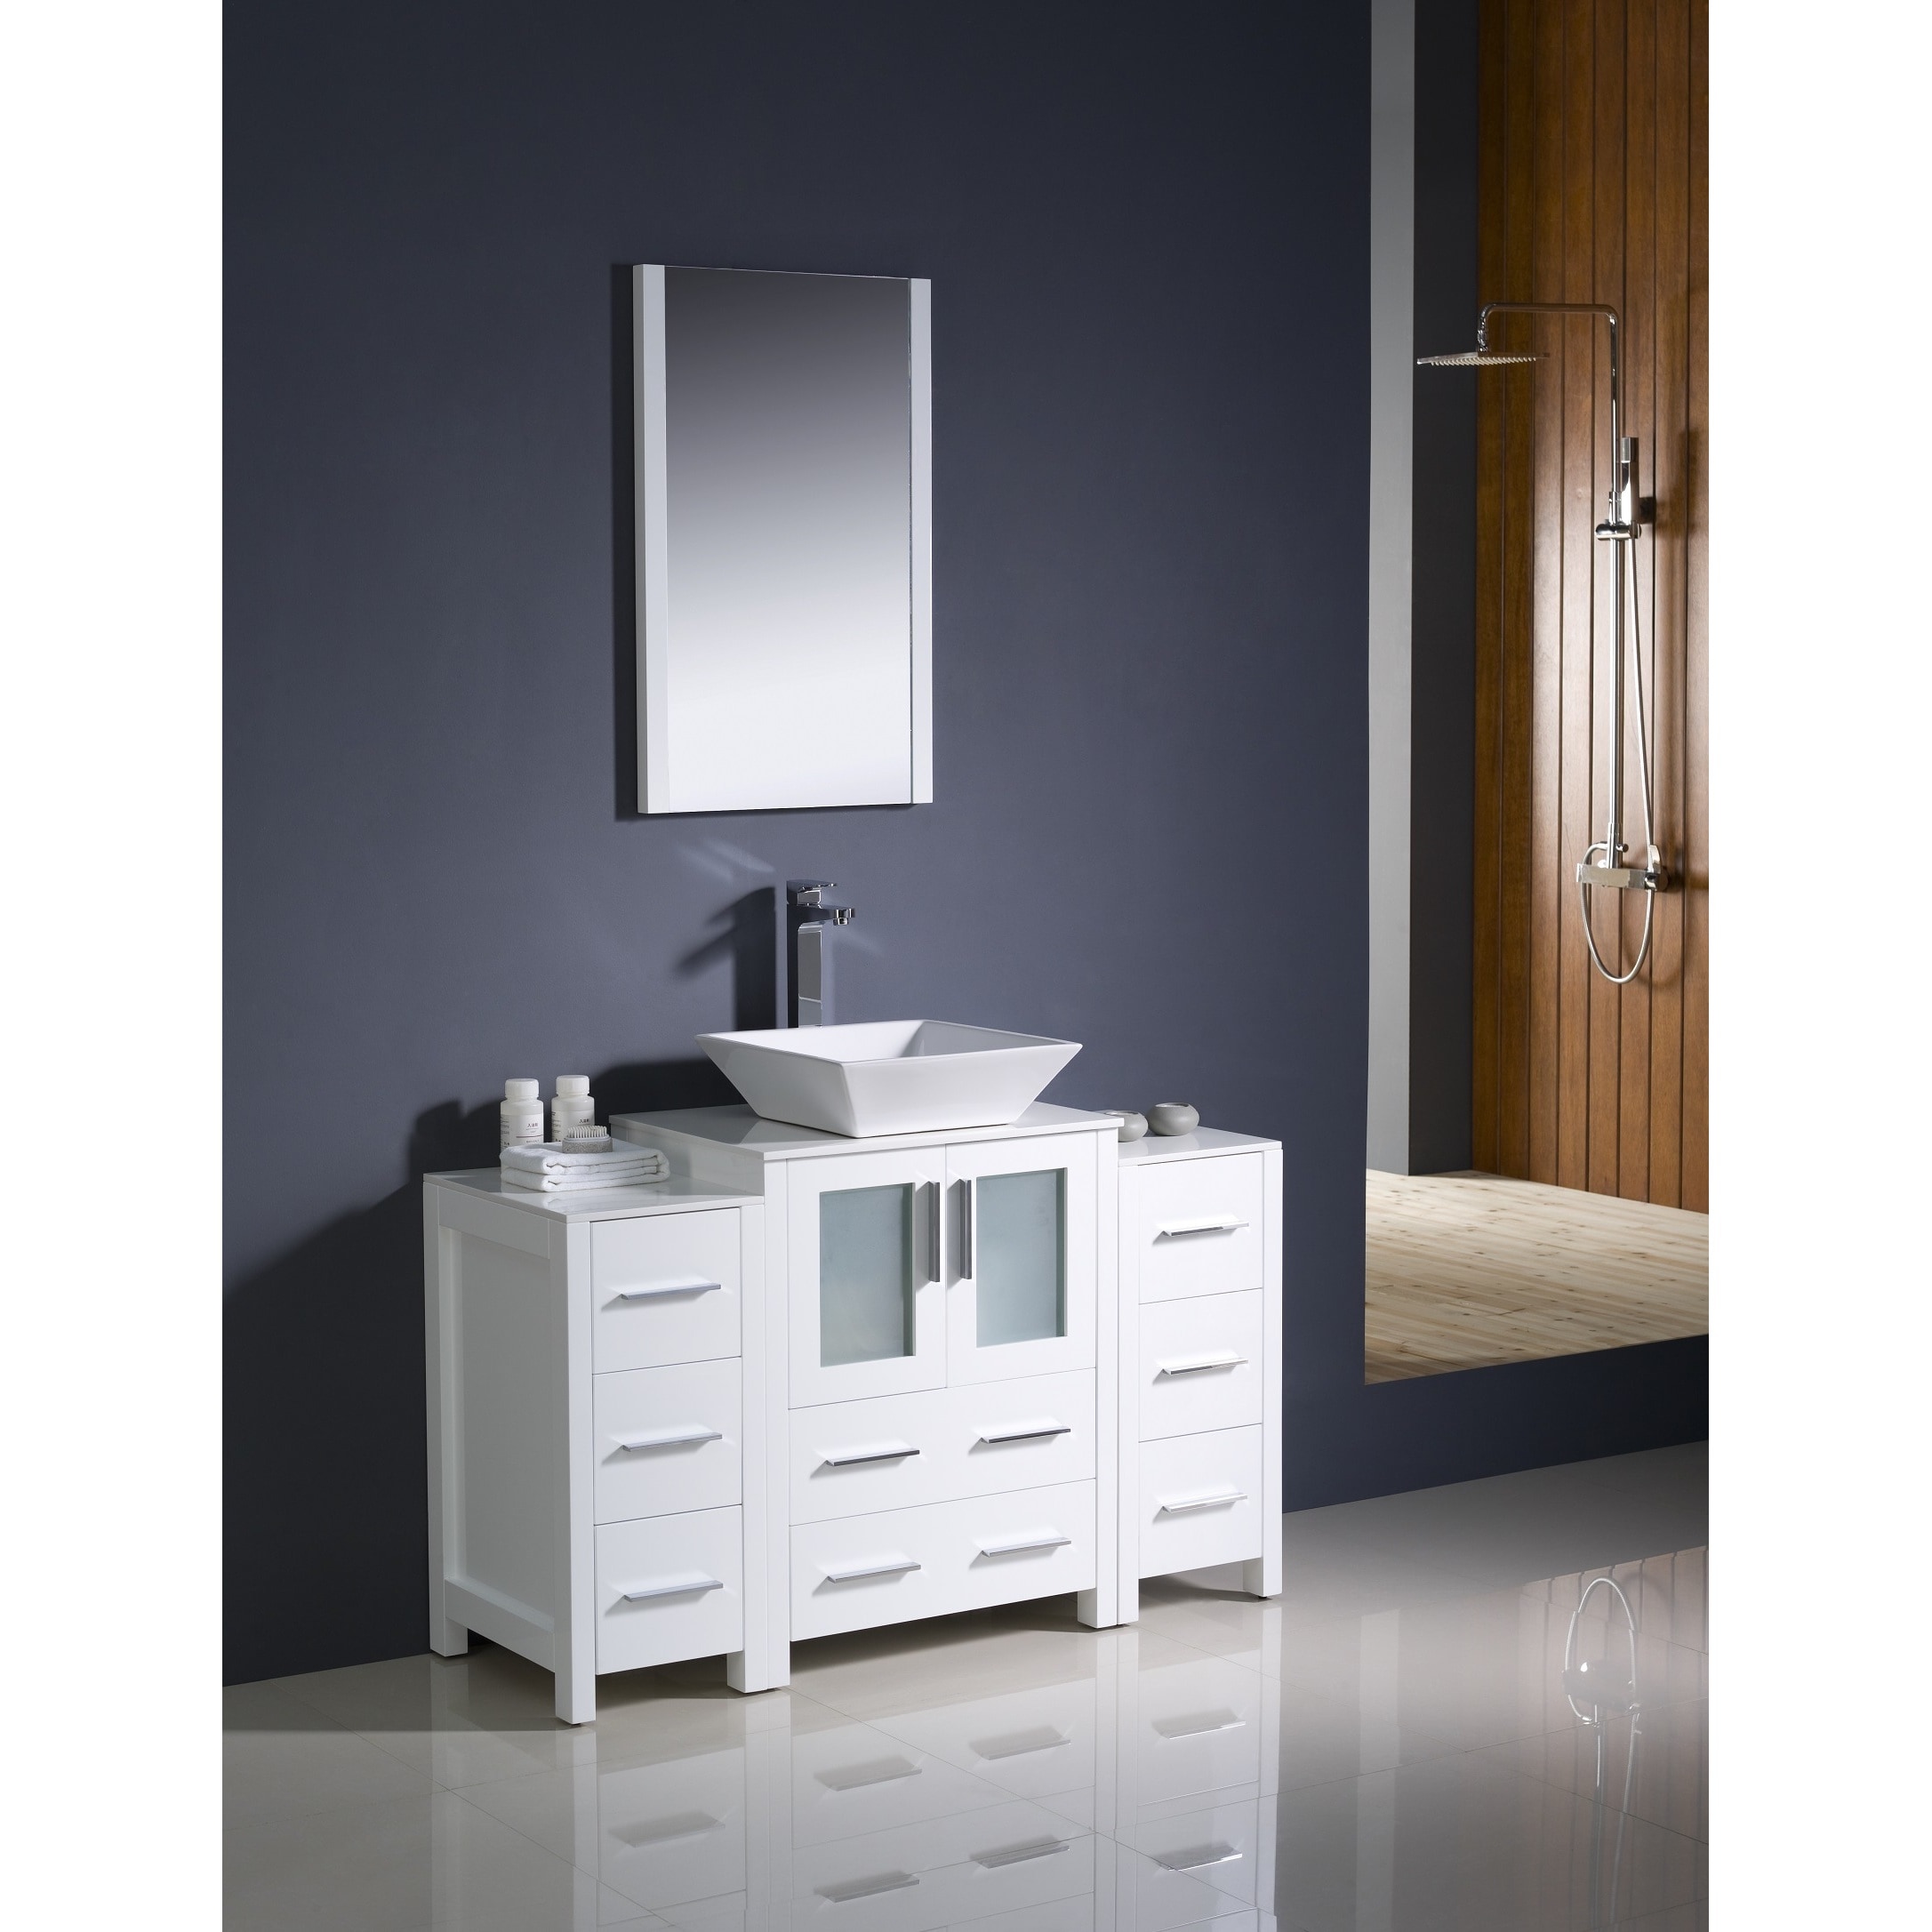 Fresca Torino 48 Inch White Modern Bathroom Vanity With 2 Side Cabinets And Vessel Sink Overstock 10167367